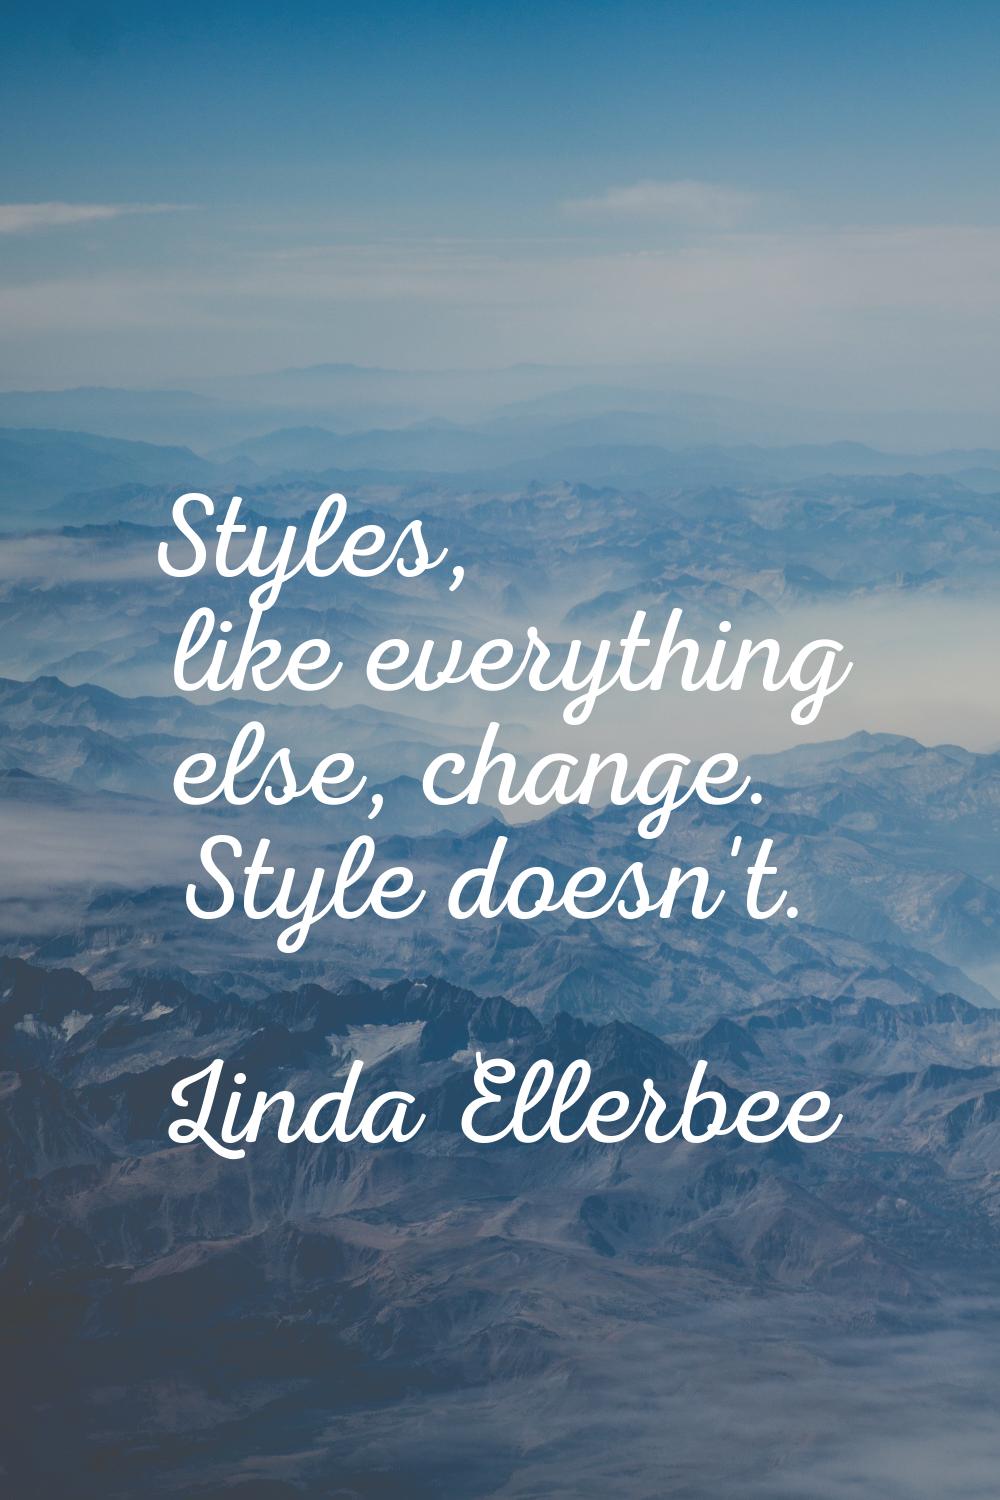 Styles, like everything else, change. Style doesn't.